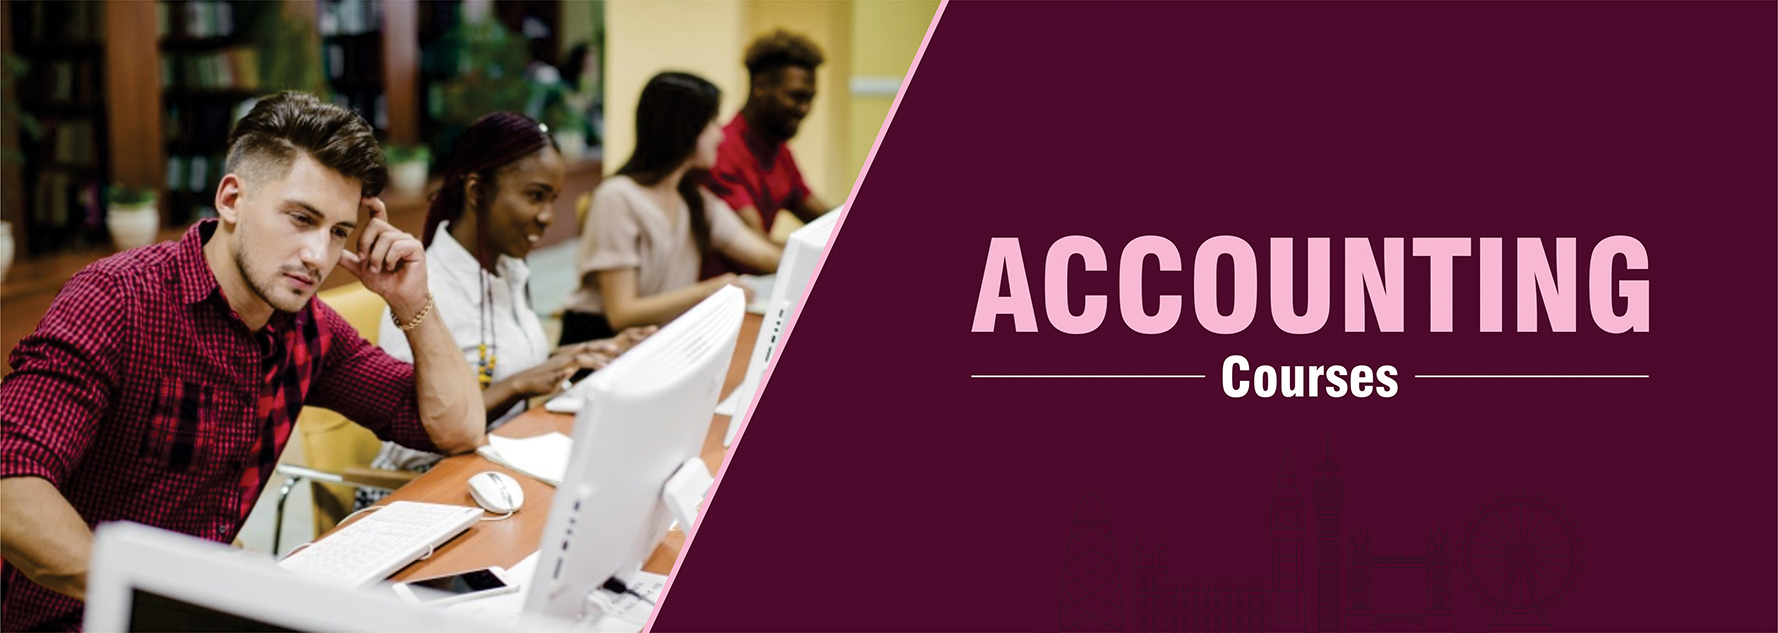 accounting-courses